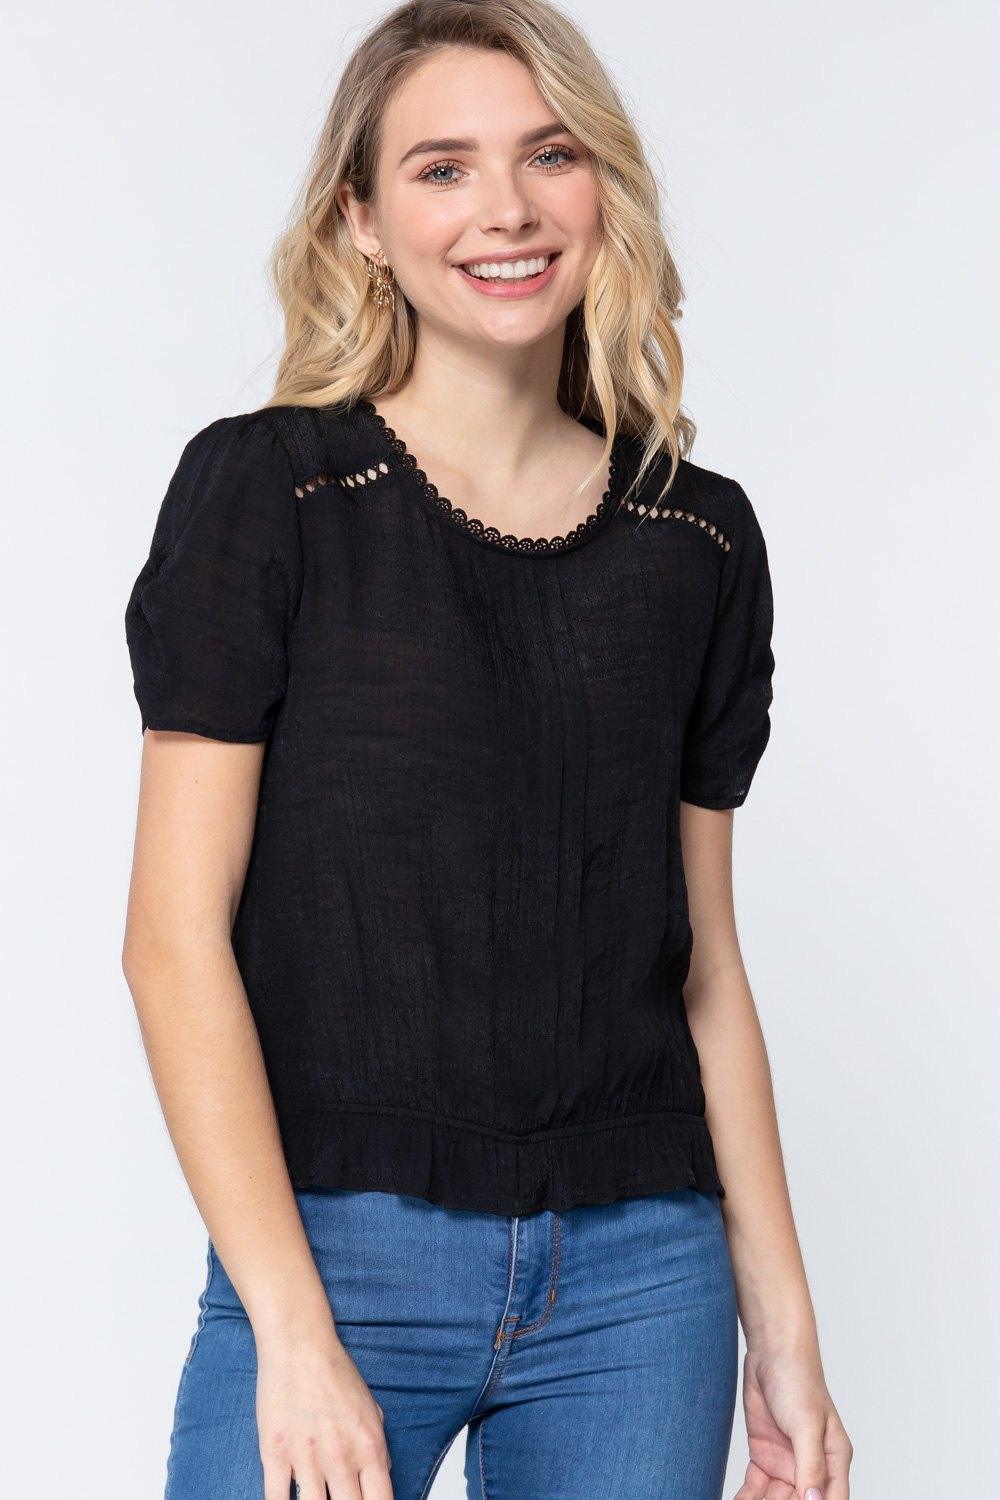 Short Shirring Slv Pleated Woven Top Naughty Smile Fashion